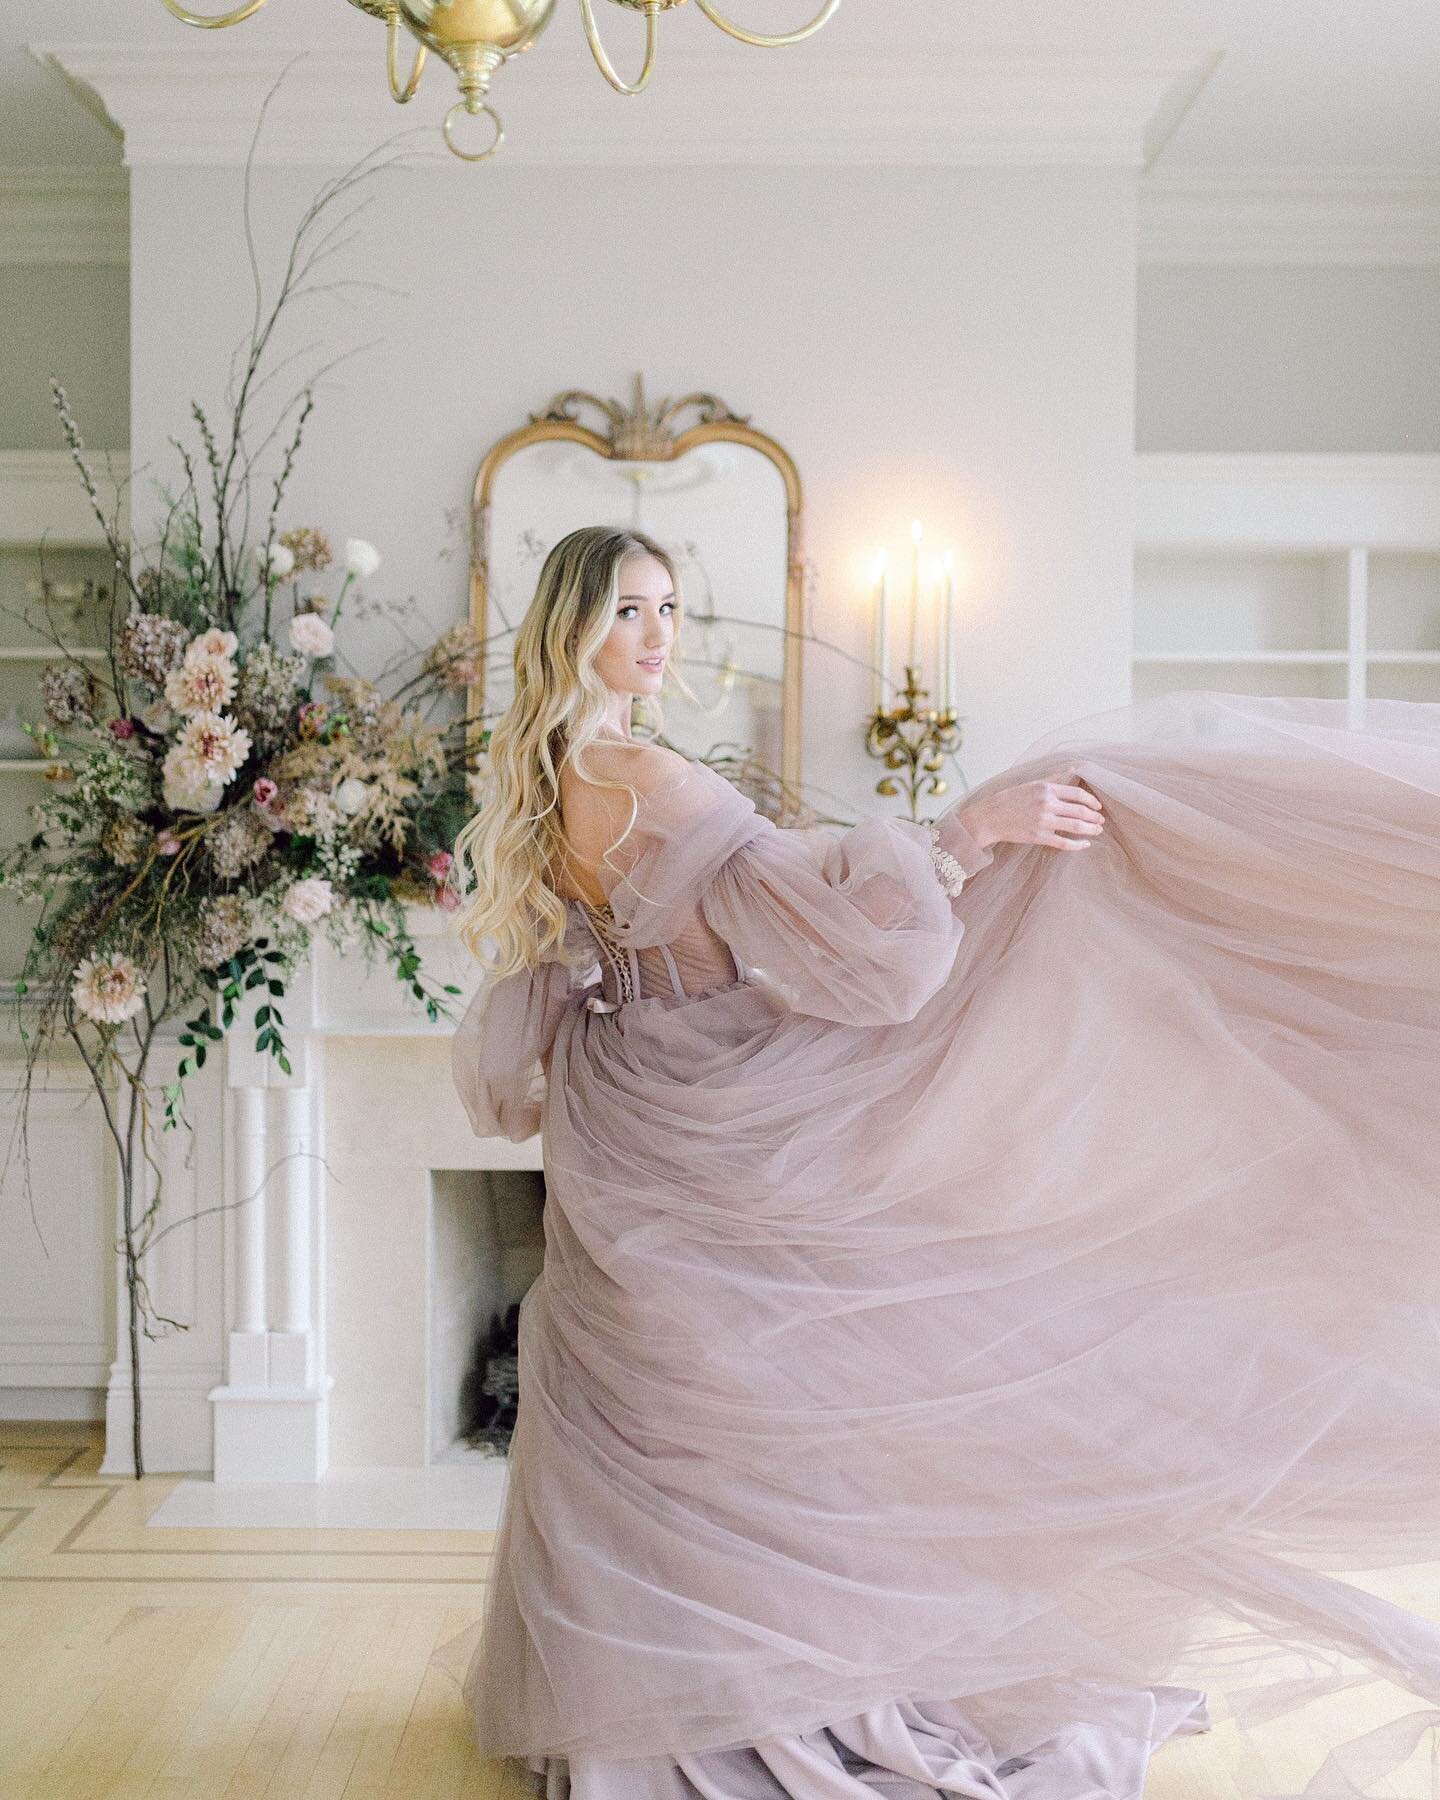 Reminiscing about this dreamy shoot we had the privilege in hosting. The space is in our reading room which any guest who books the manor gets to experience. Also if you book your wedding at the Estate you can get ready in one of the king suites or t